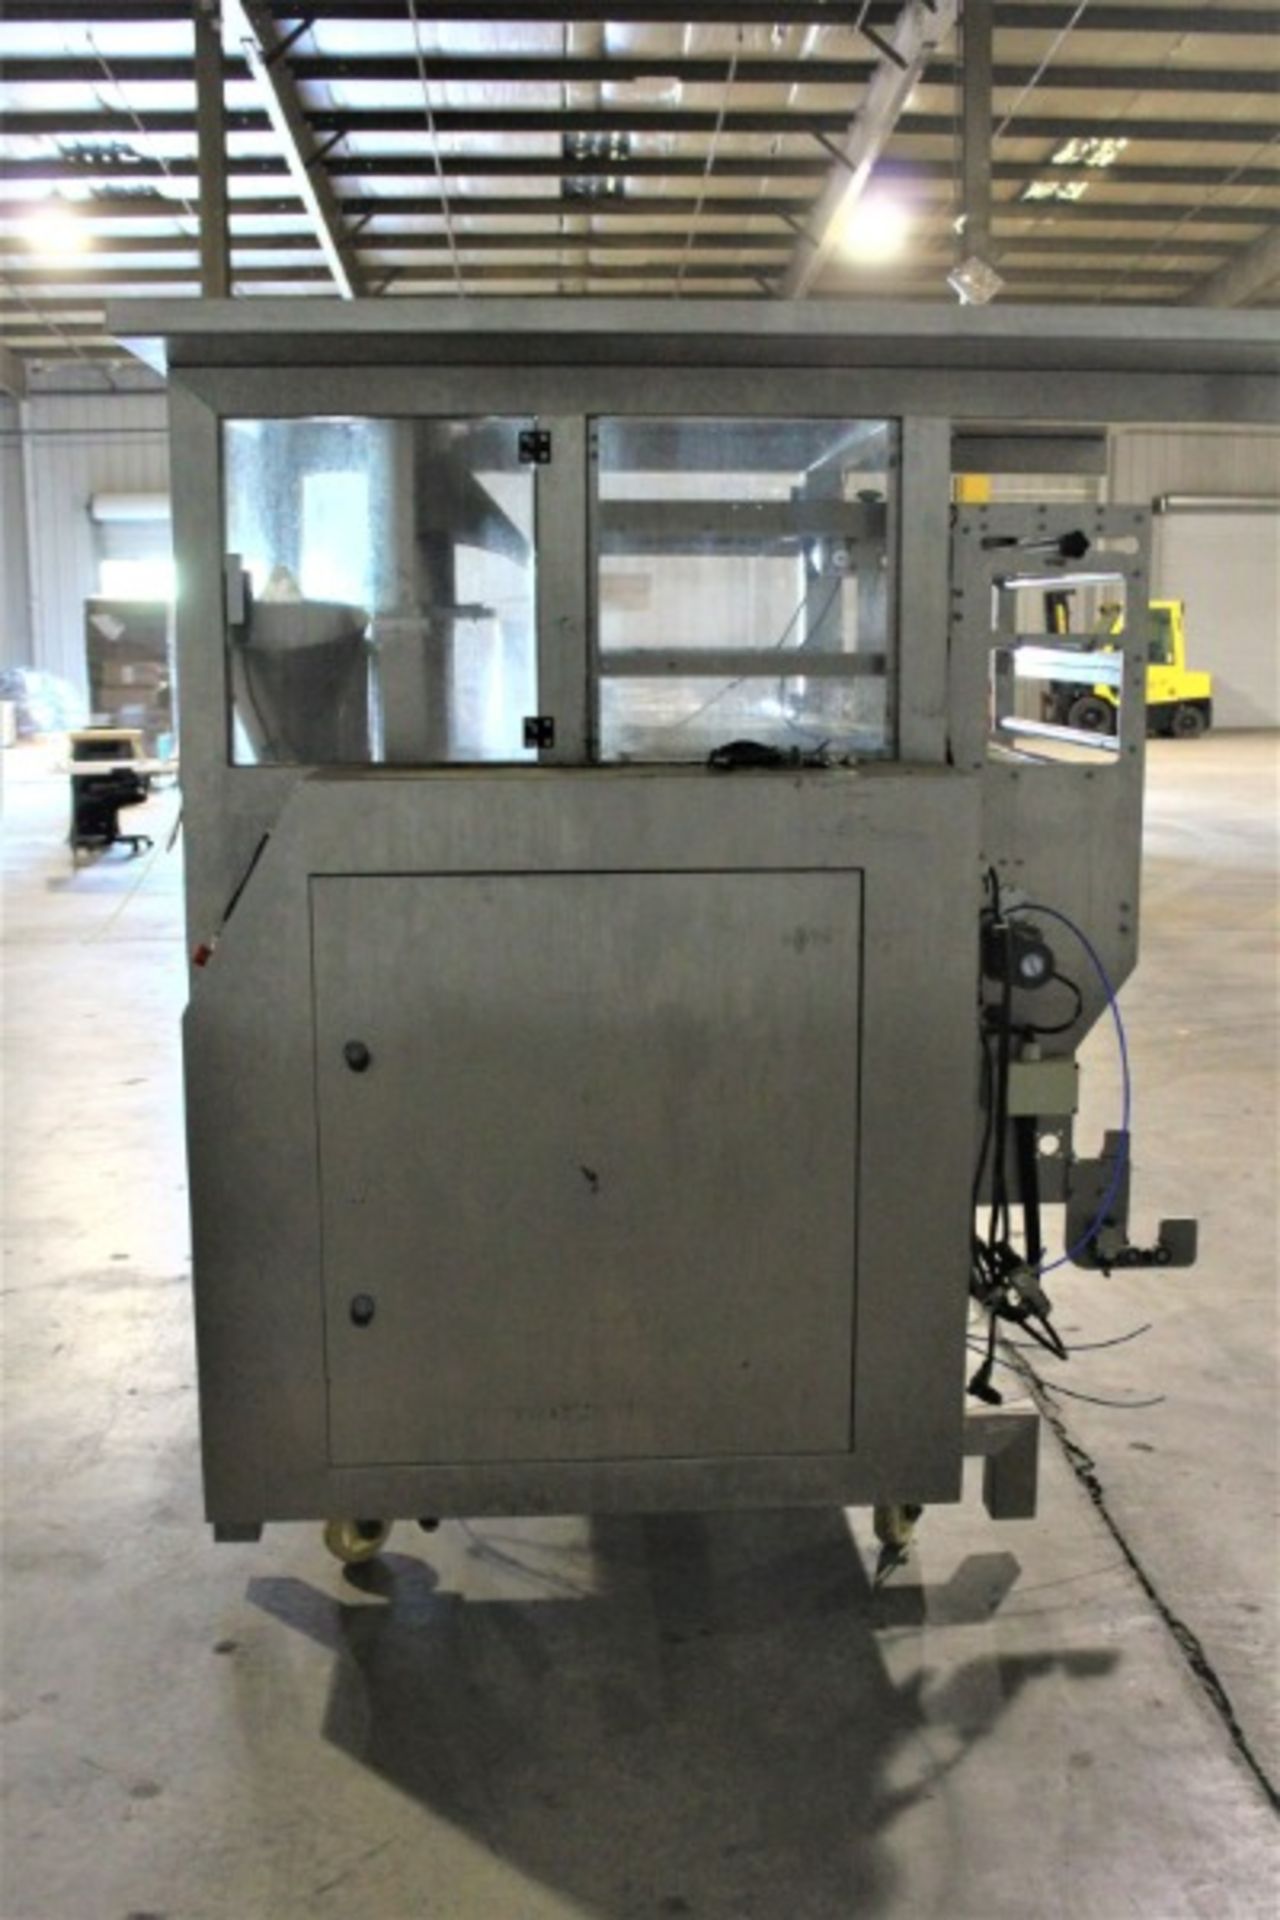 Ohlson Vertical Automatic Form Fill & Seal Machine, VFFX Series, Item# bbncohlsonBagvffx - Image 11 of 16